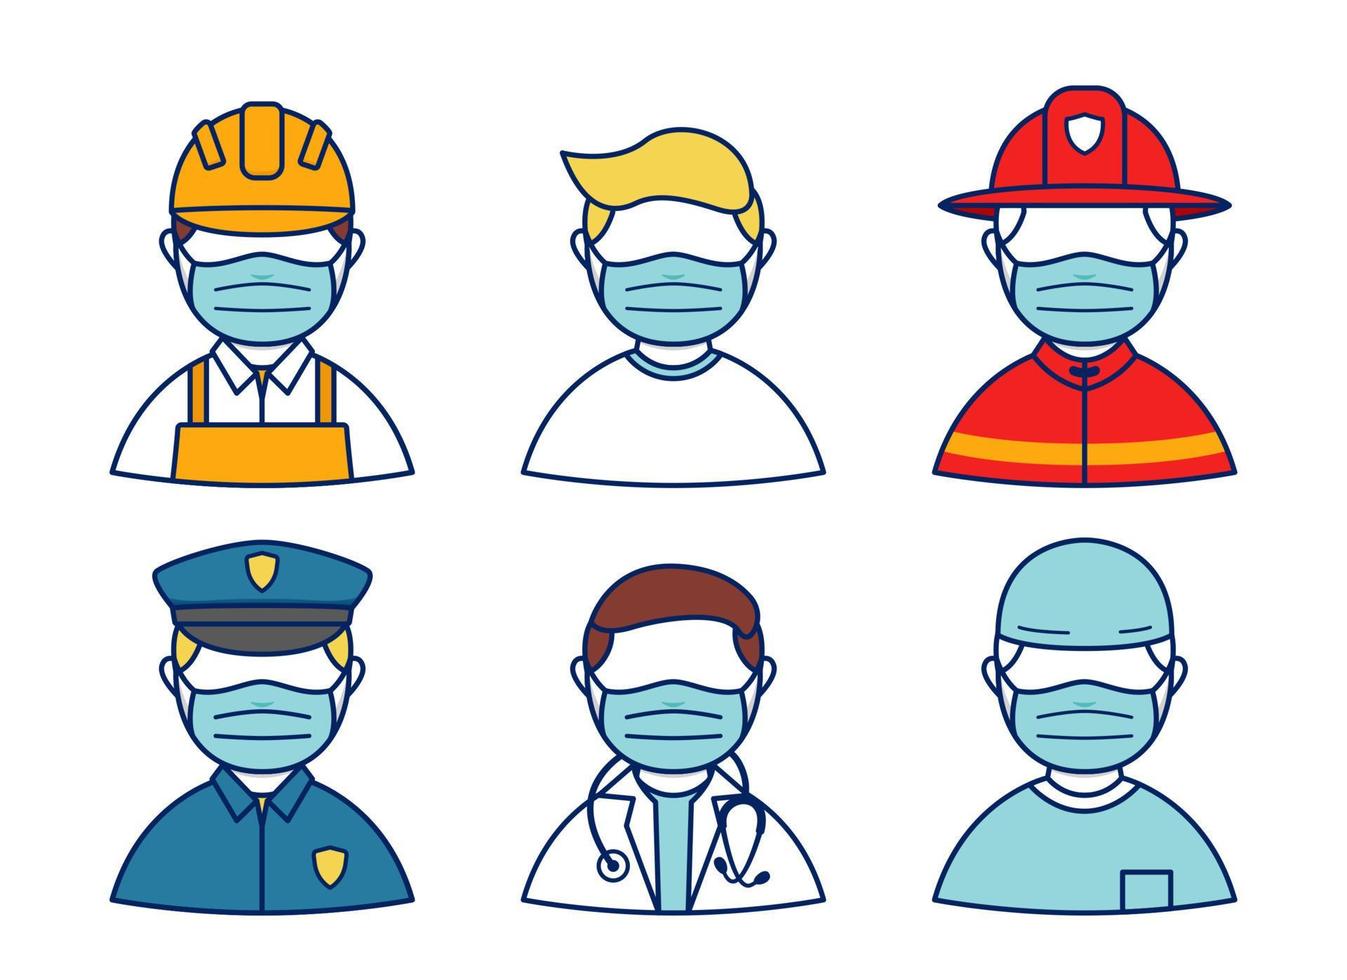 People wear mask protection from corona virus avatar character profession set, police, doctor, firefighter, surgery vector